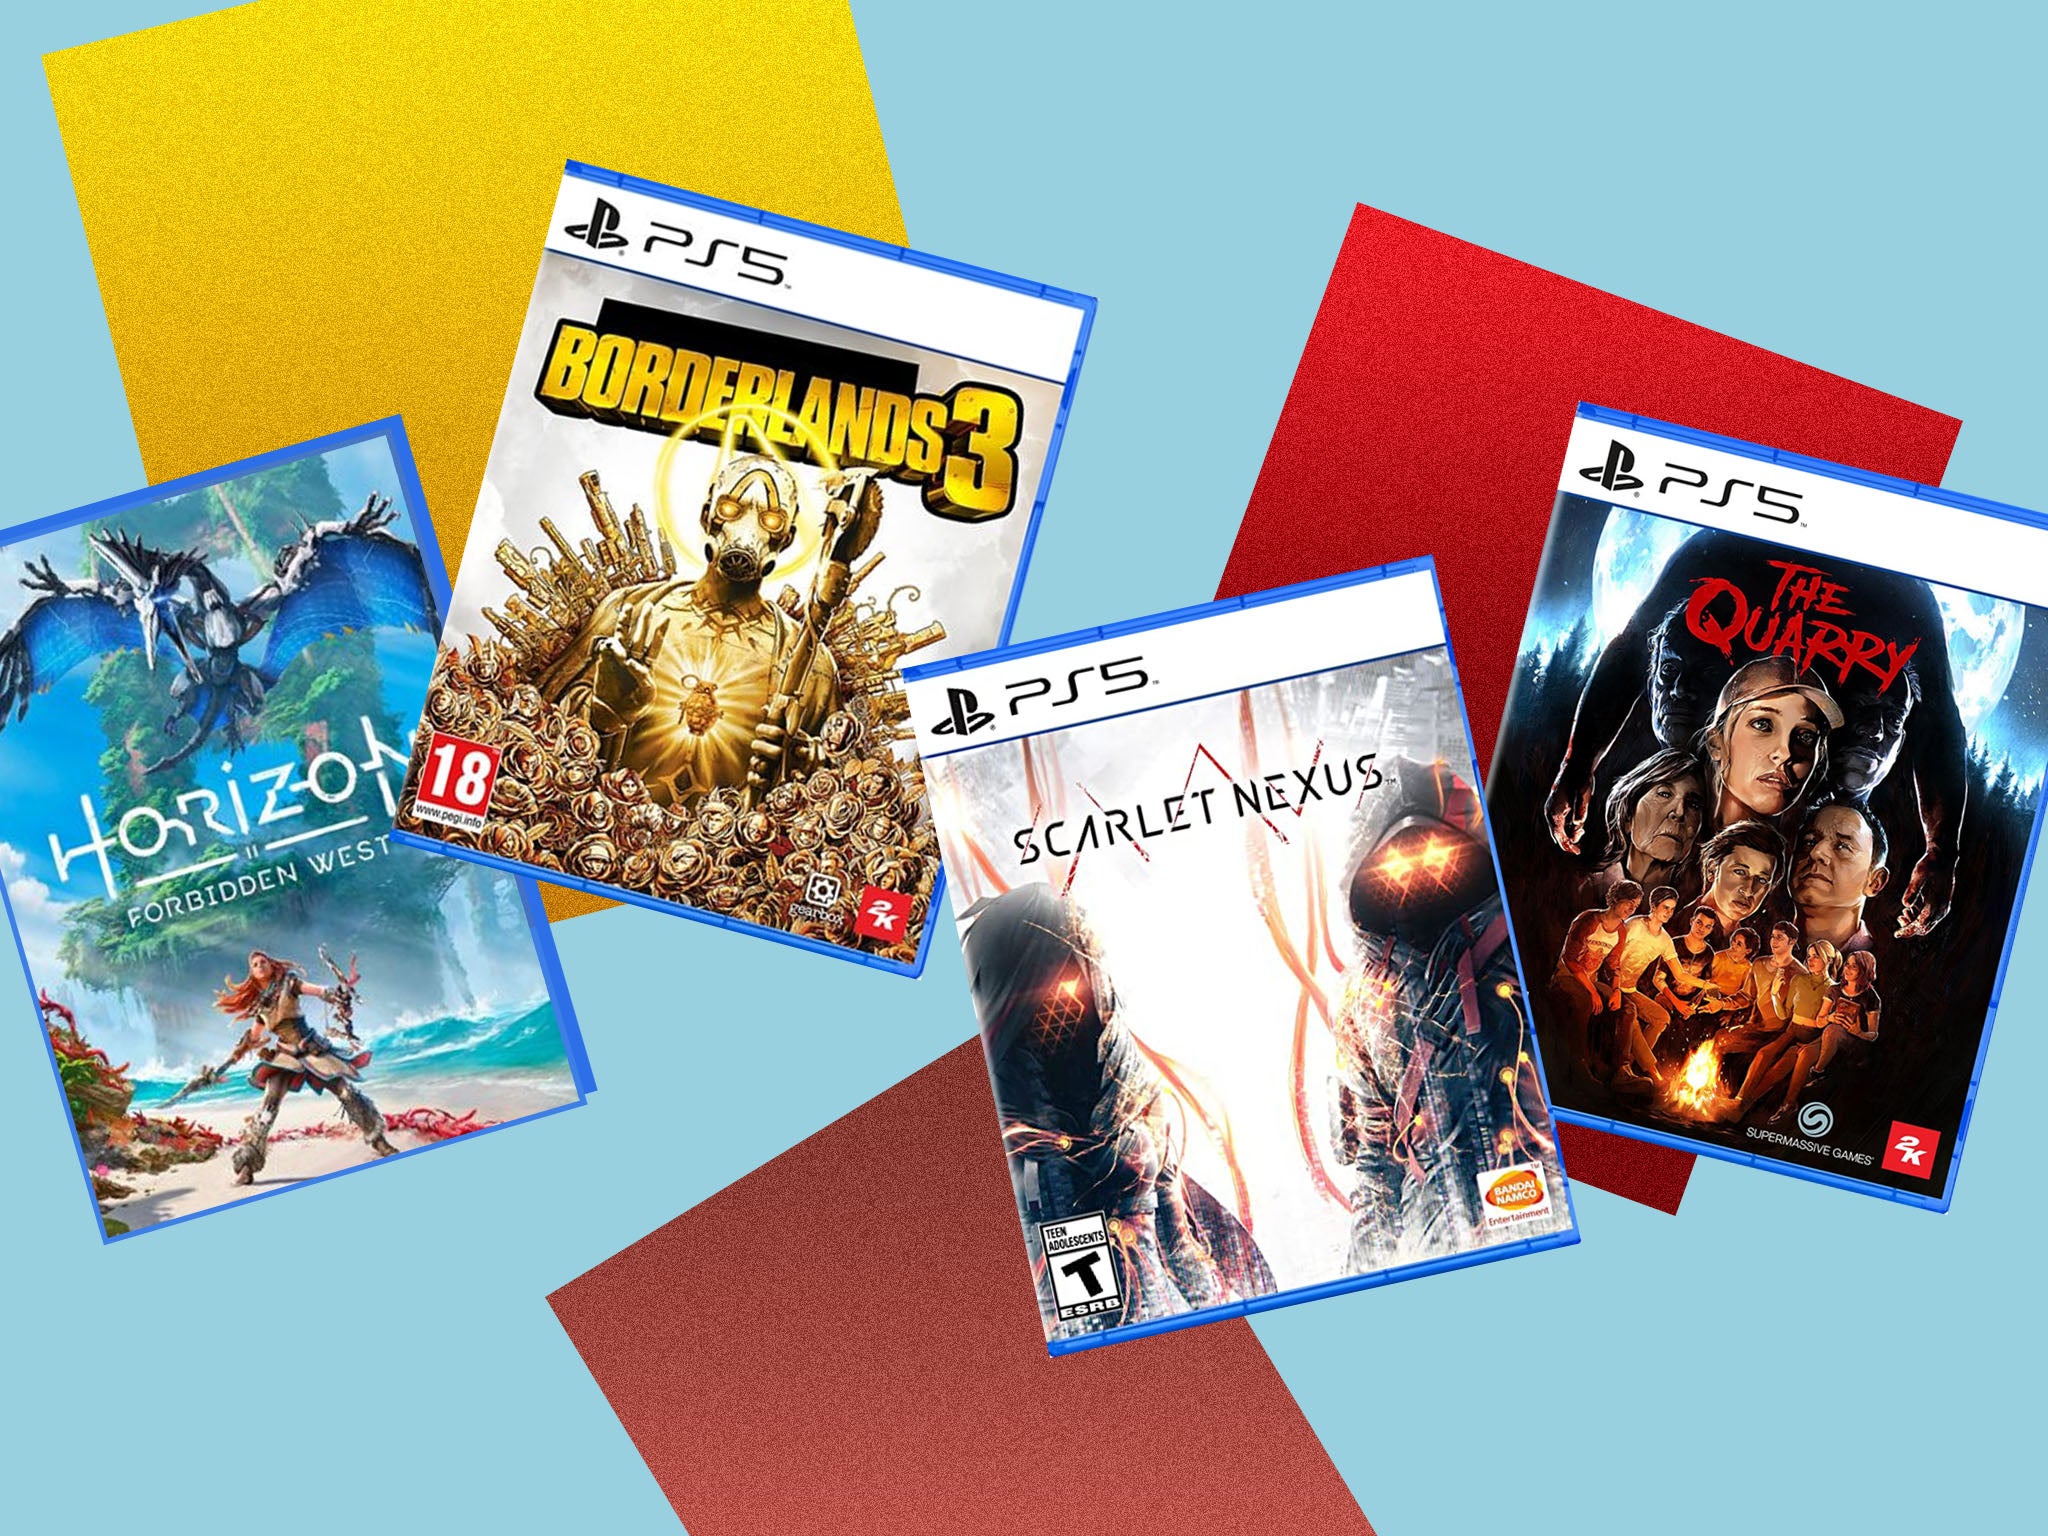 PlayStation free download worth £50 now available, no PS Plus required